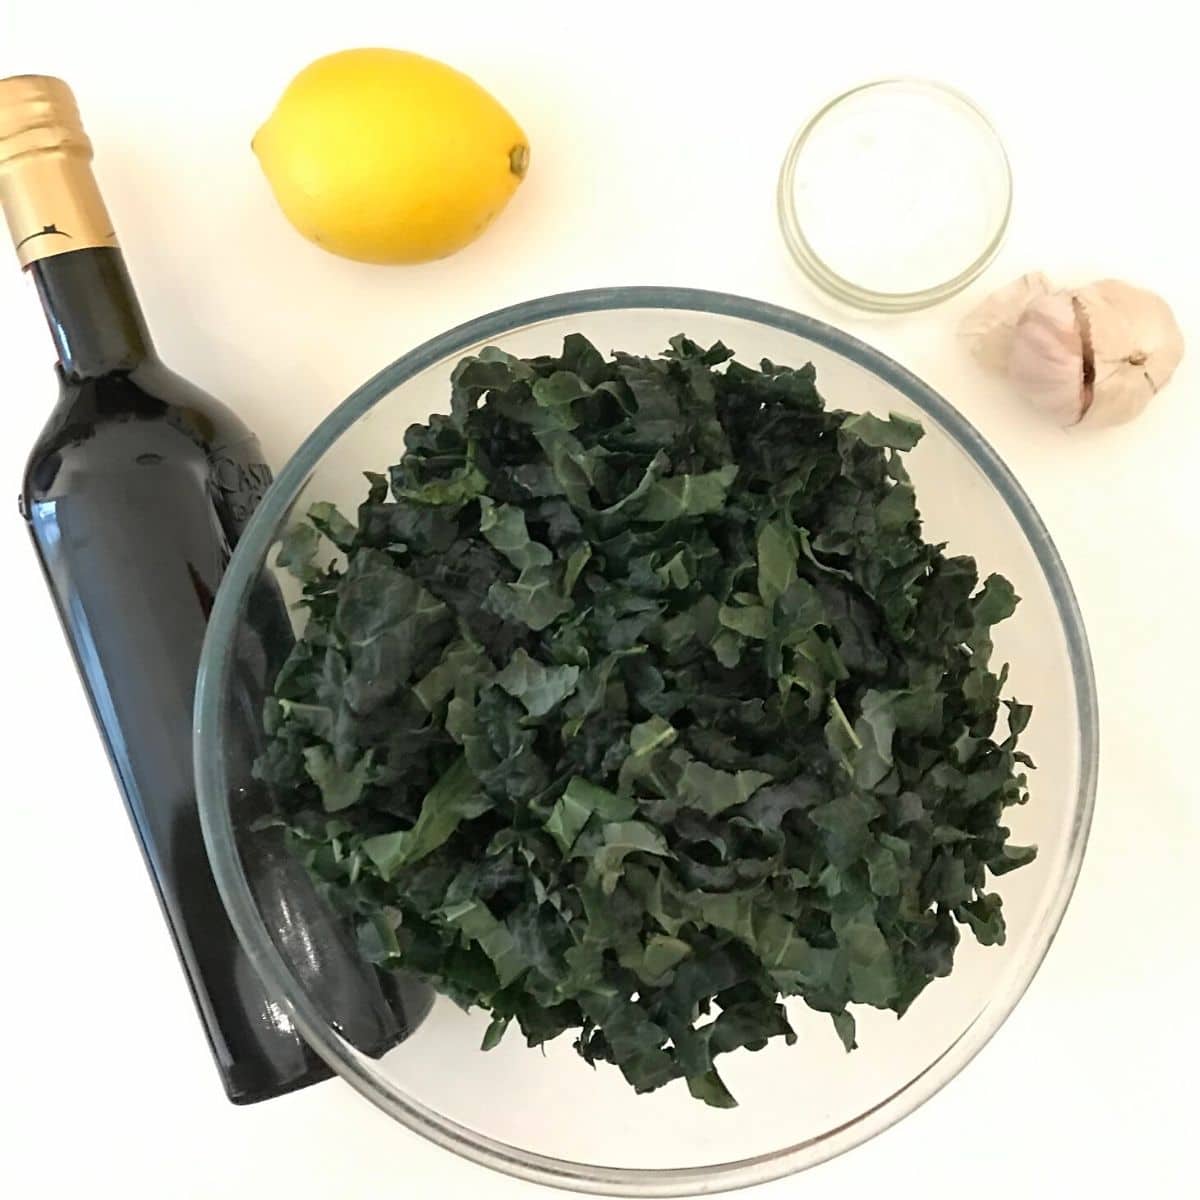 Chopped cavolo nero in glass bowl, bottle of olive oil, a lemon, salt and garlic.